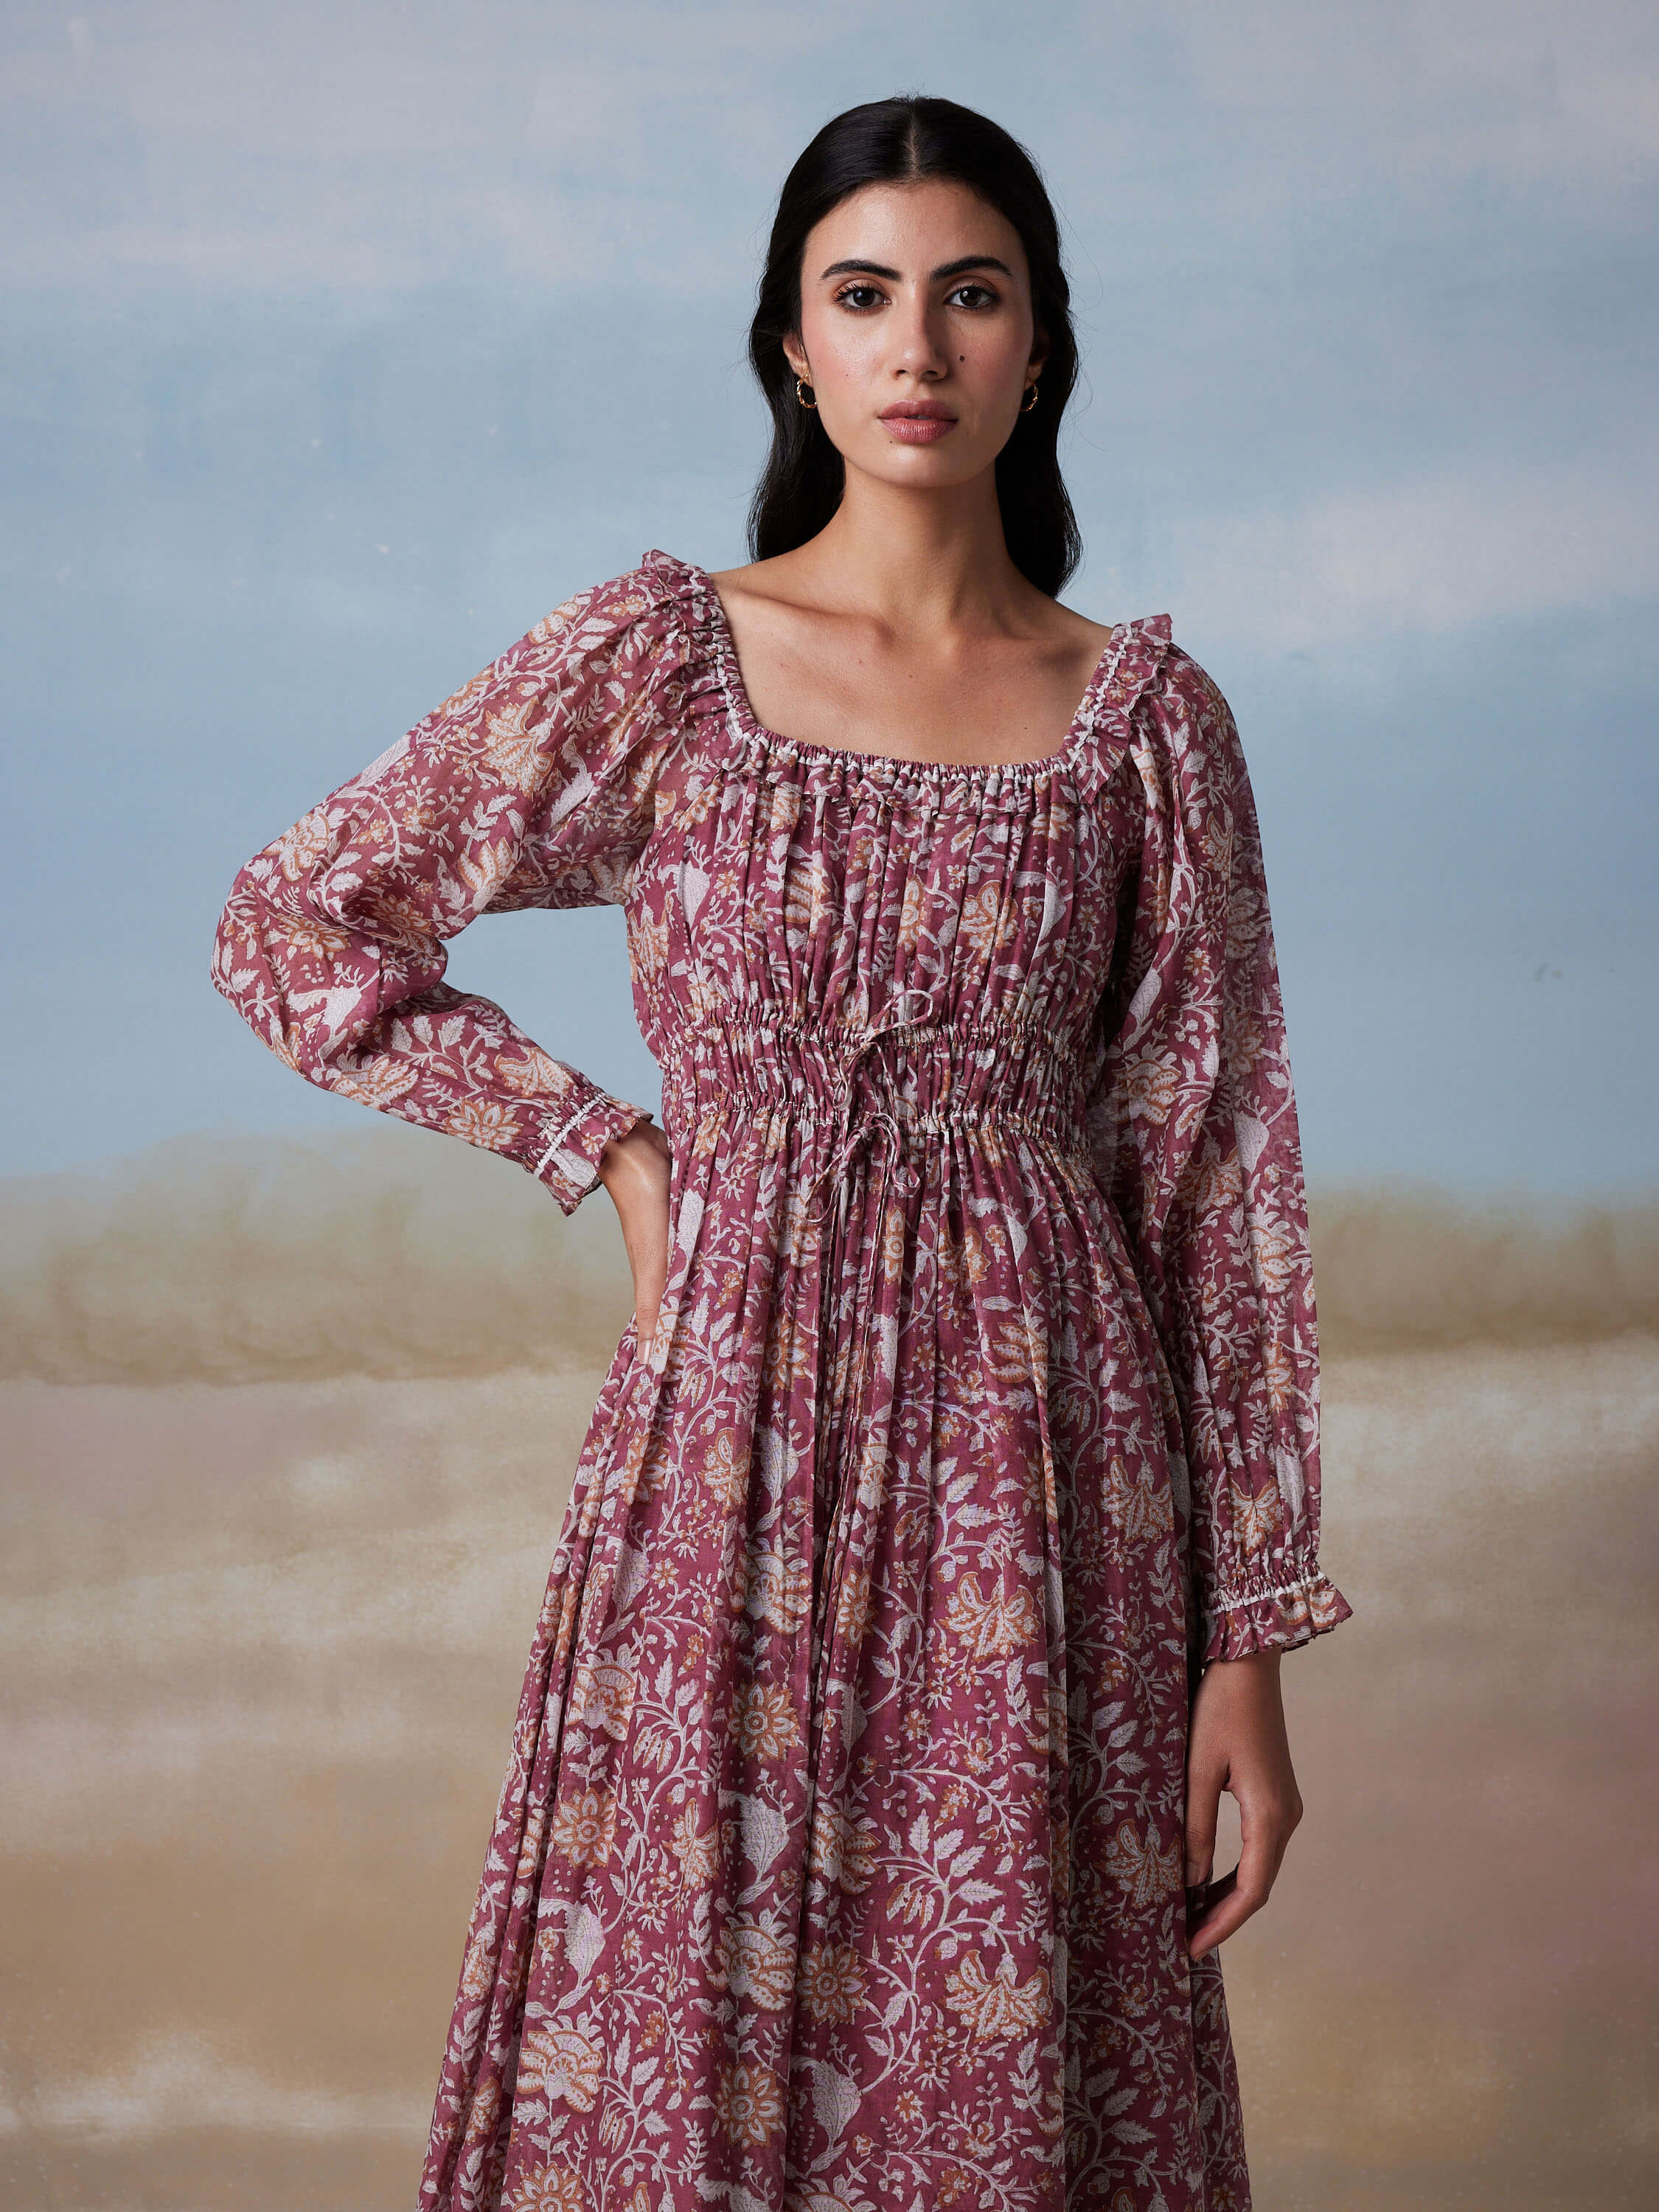 Woman in floral long-sleeve dress against a soft gradient background.